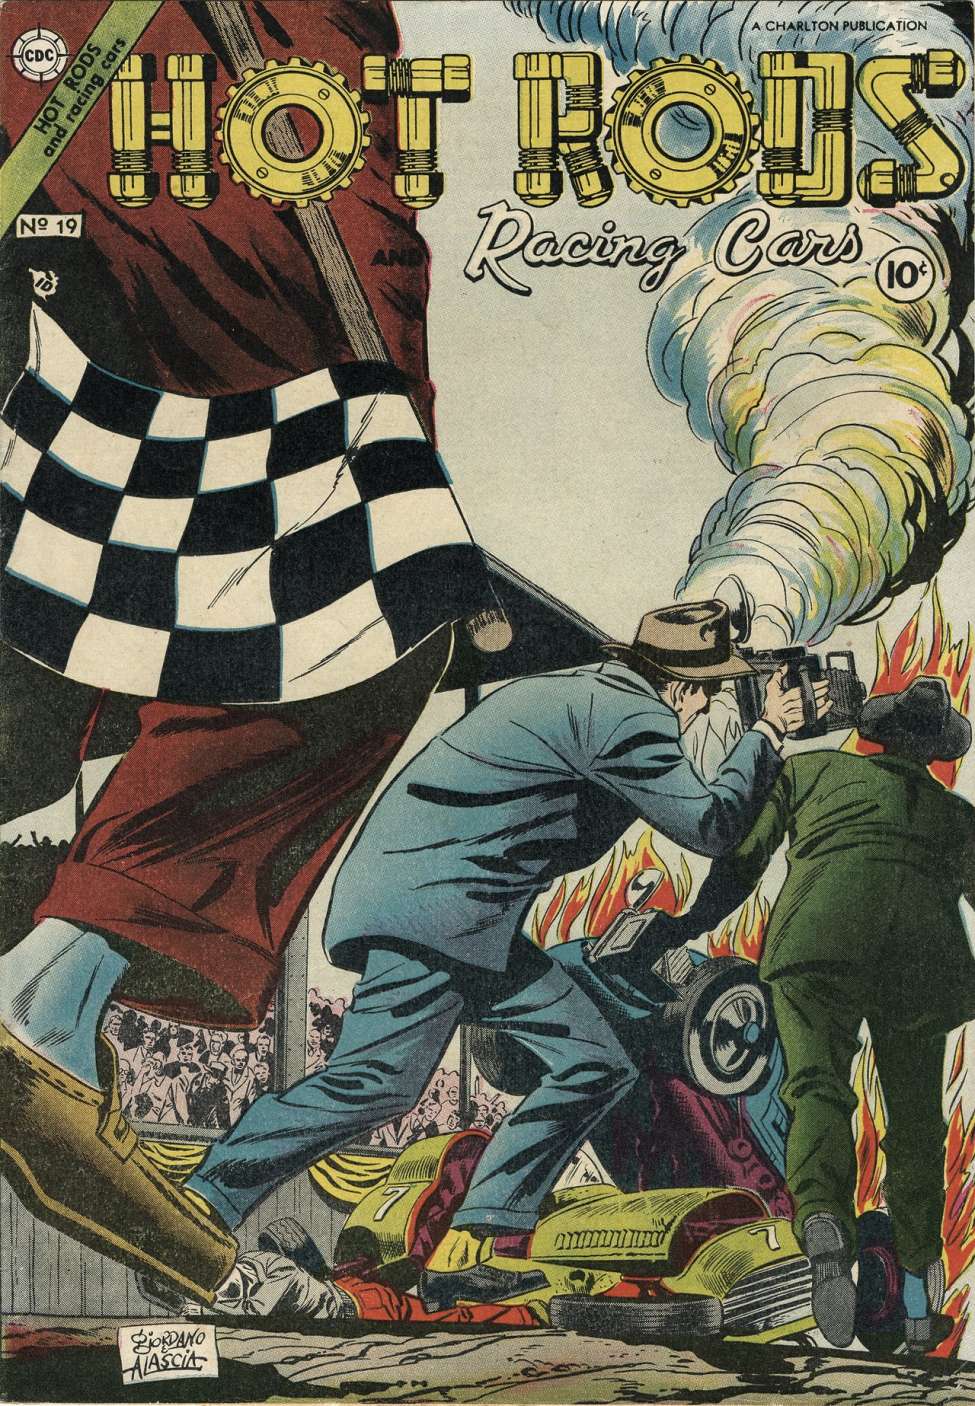 Comic Book Cover For Hot Rods and Racing Cars 19